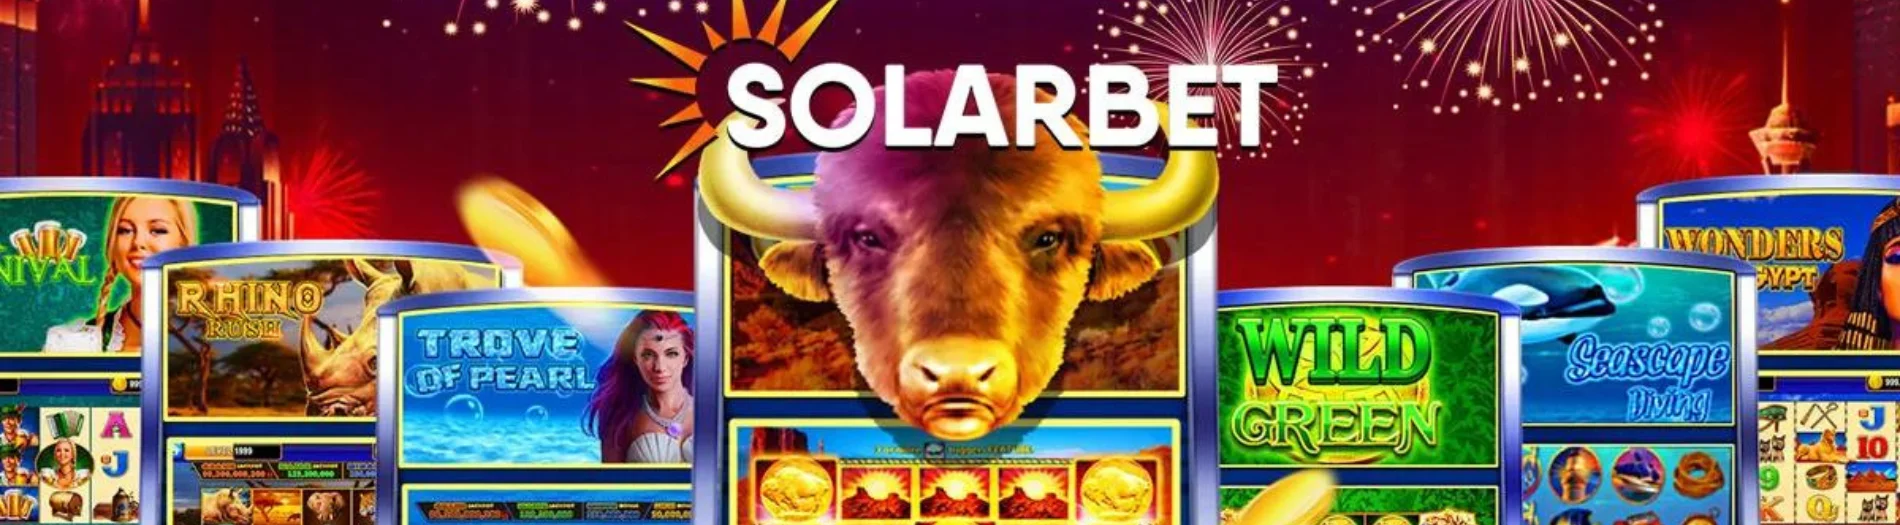 Solarbet - Find all popular online casino games in Singapore.